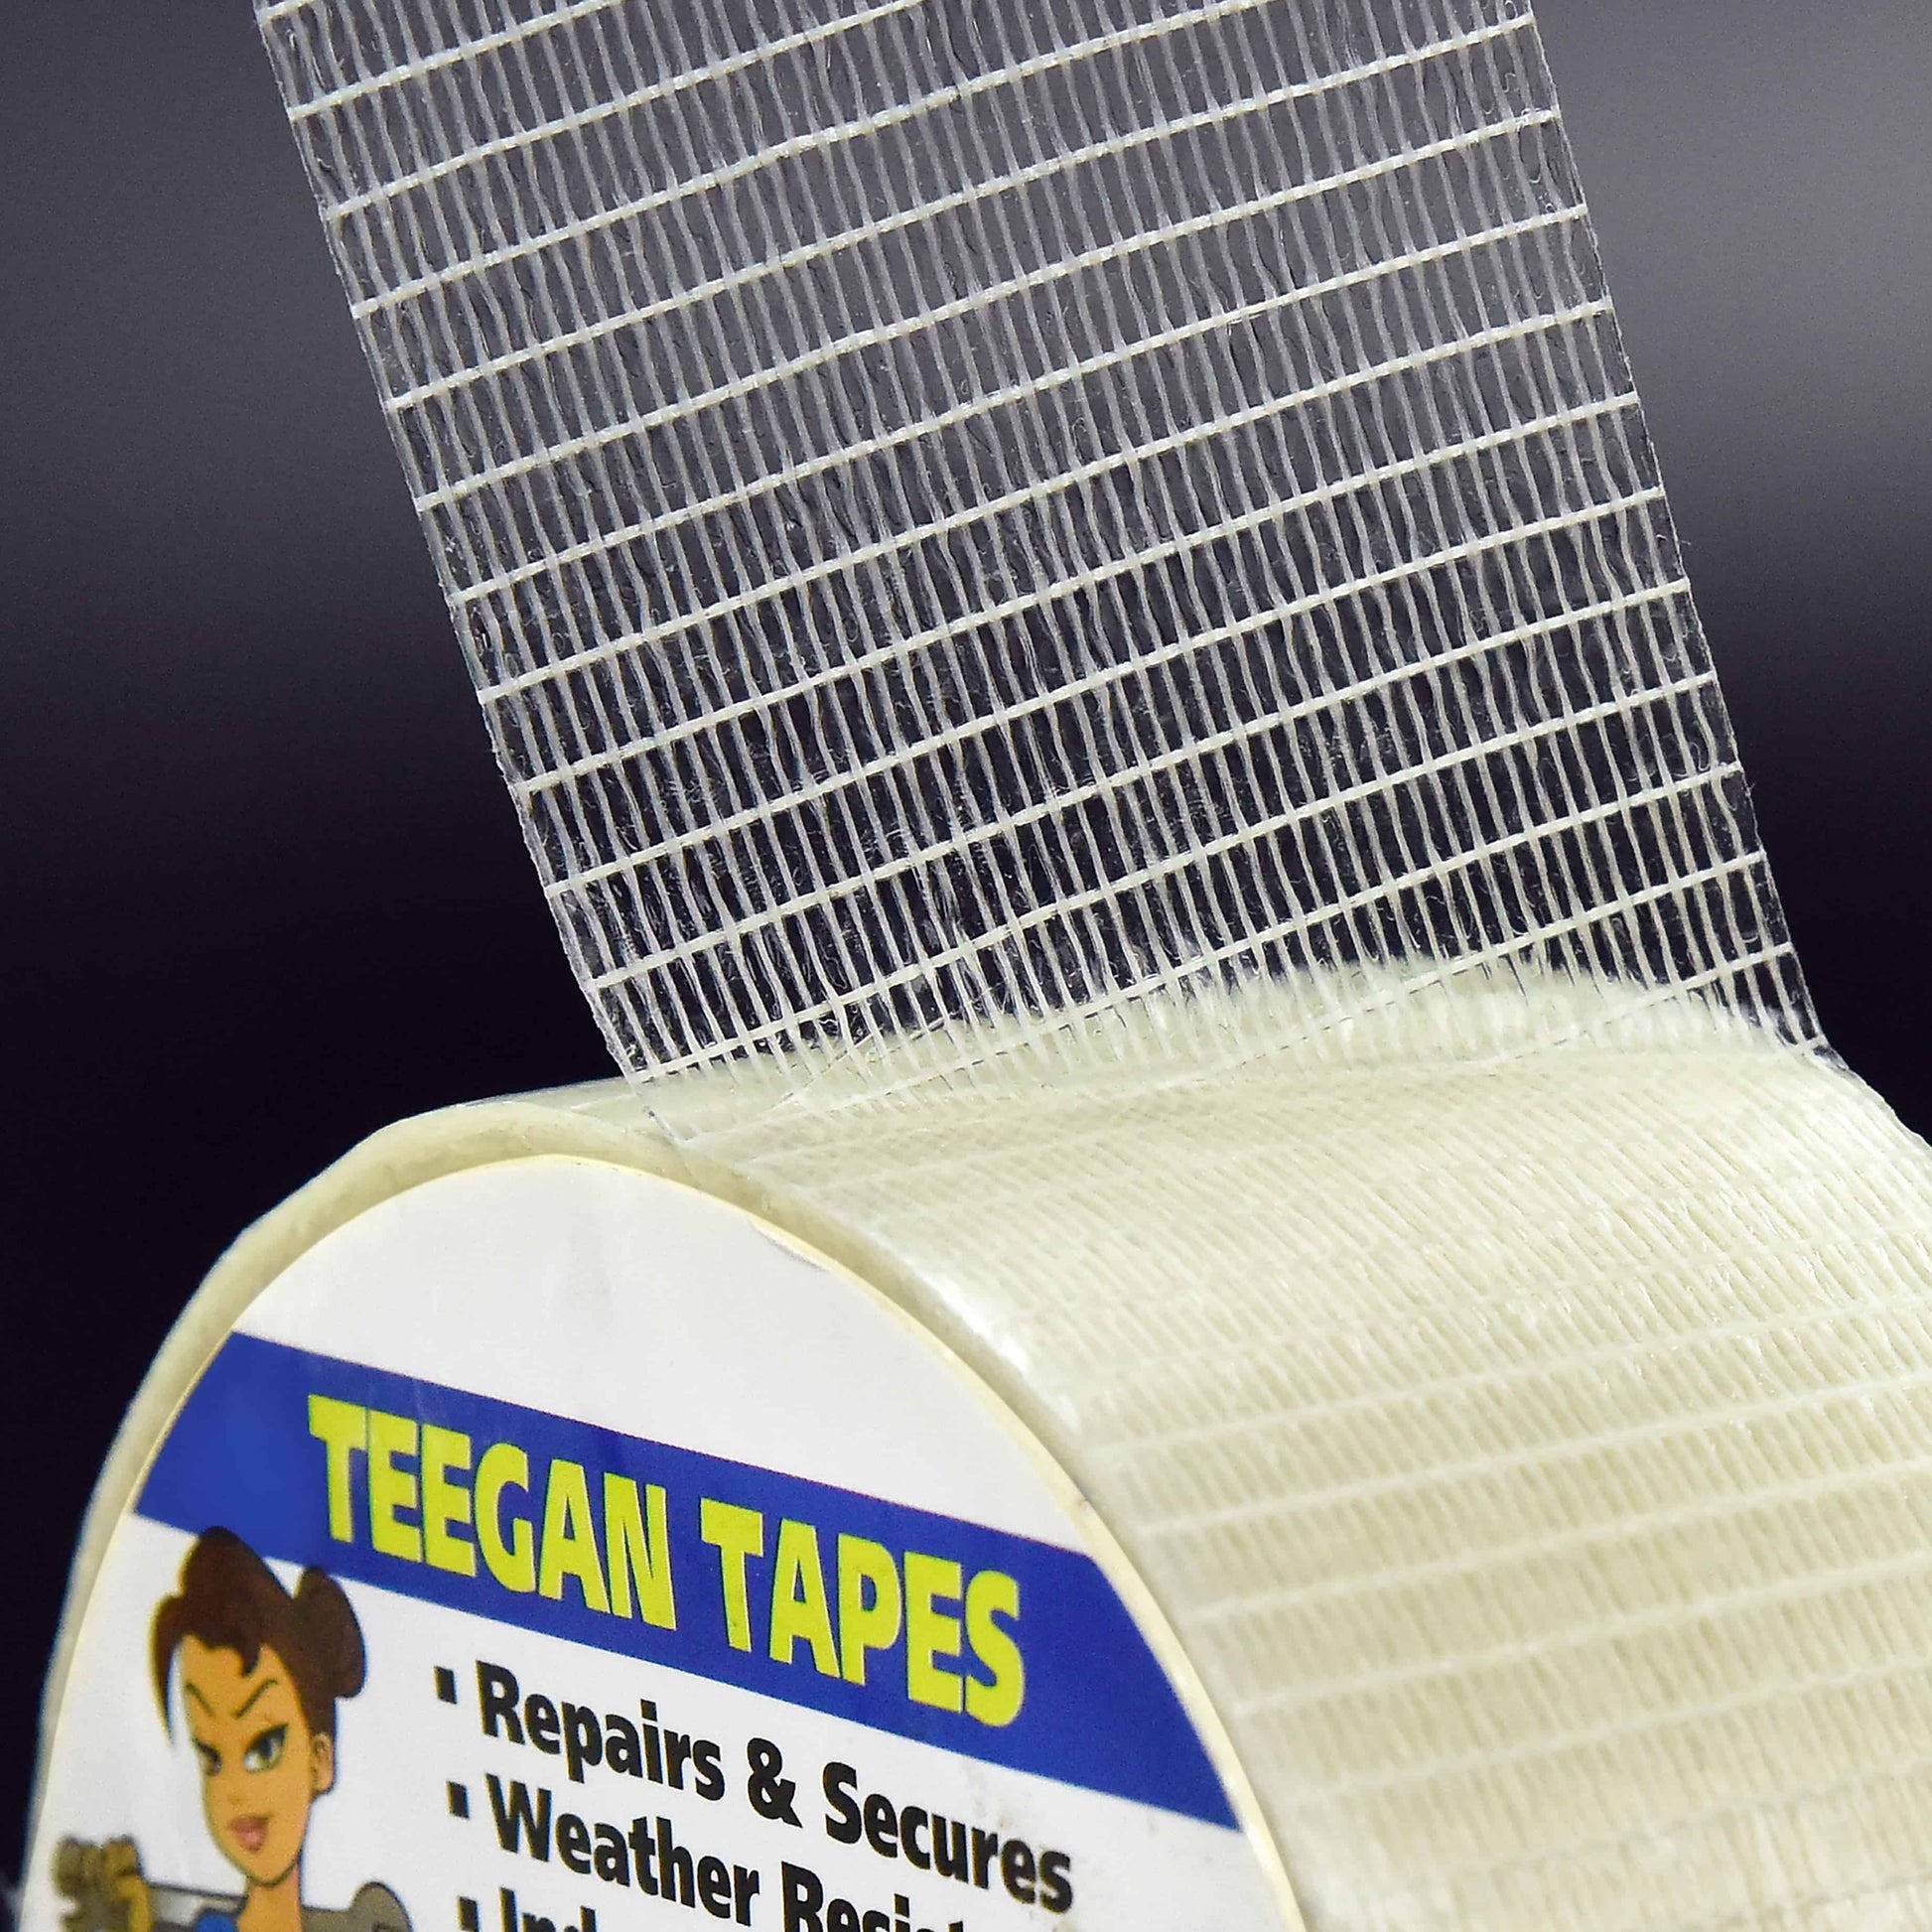 Gaffer Power Transparent Duct Tape Ultra High Performance Weather Resistant Tape for Discreet Repairs and Mounting | Residential Commercial and Indust